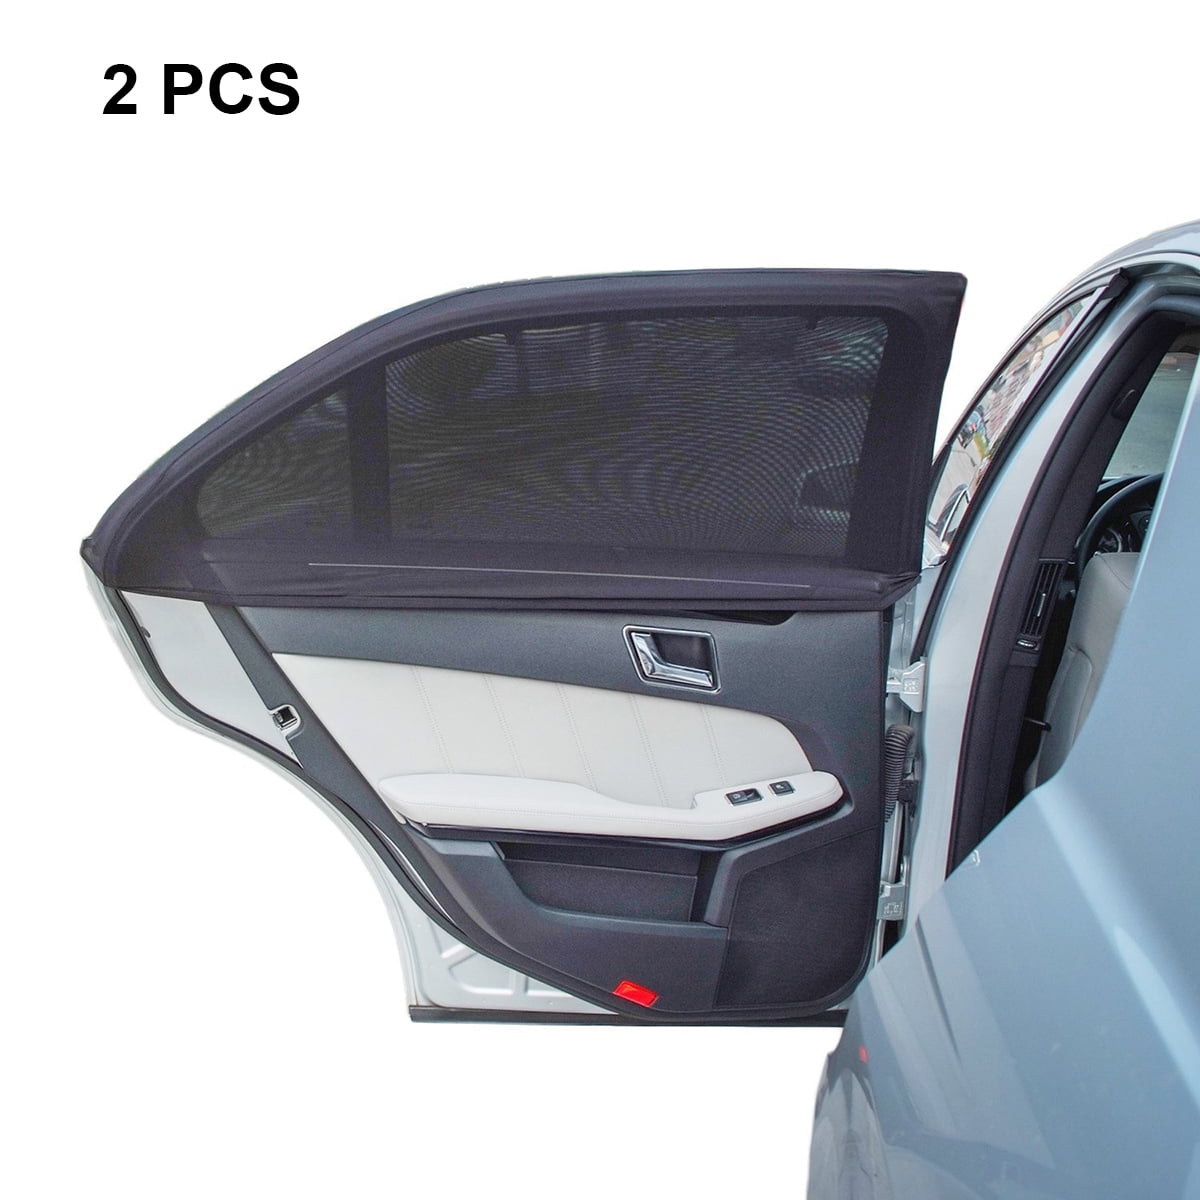 Covers Rear Side Windows 40x20 Universal Fits Most Vehicles Car Side Window Sun Shade Car Sun Shades with UV Protection 2 Pack Breathable Mesh Sun Blinds for Cars 